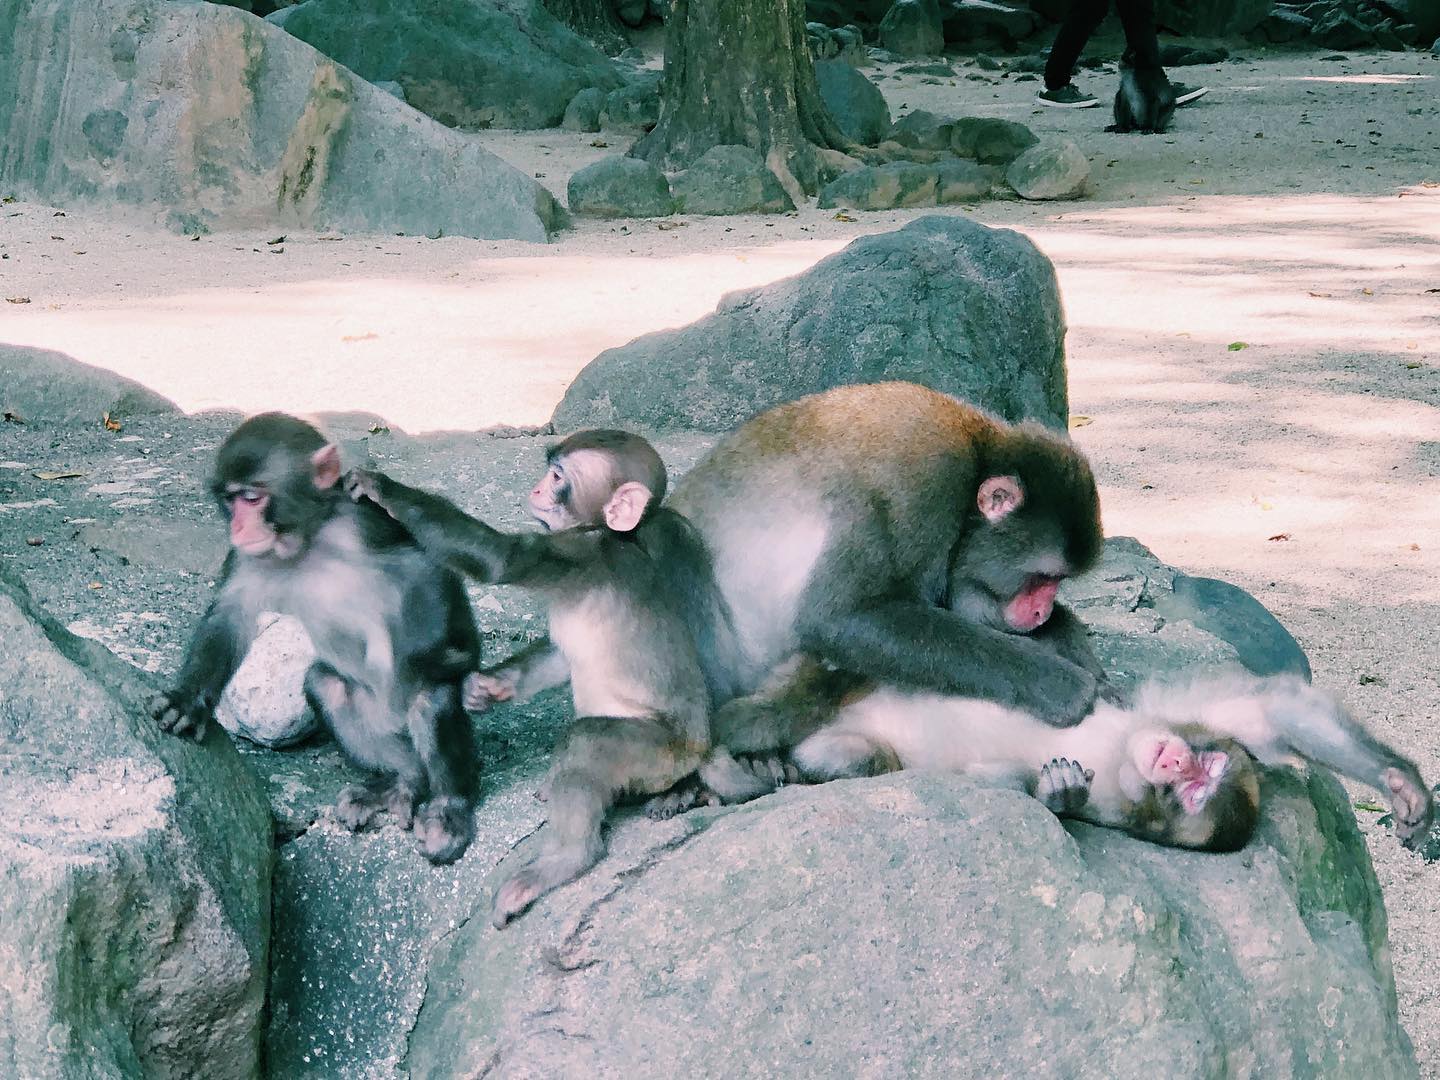 _⁣
For today’s from AOI Global, we have an adorable family of Nihonzaru (otherwise known as Japanese monkeys or snow monkeys). ⁣

This species is native to Japan and is the most northern-living nonhuman primate. They are prominently featured in the religion, folklore, and art of Japan. You can find some of these monkeys enjoying a nice spa day at the natural hot springs during winter. 

#weeklyinspiration� #remoteshooting⁣